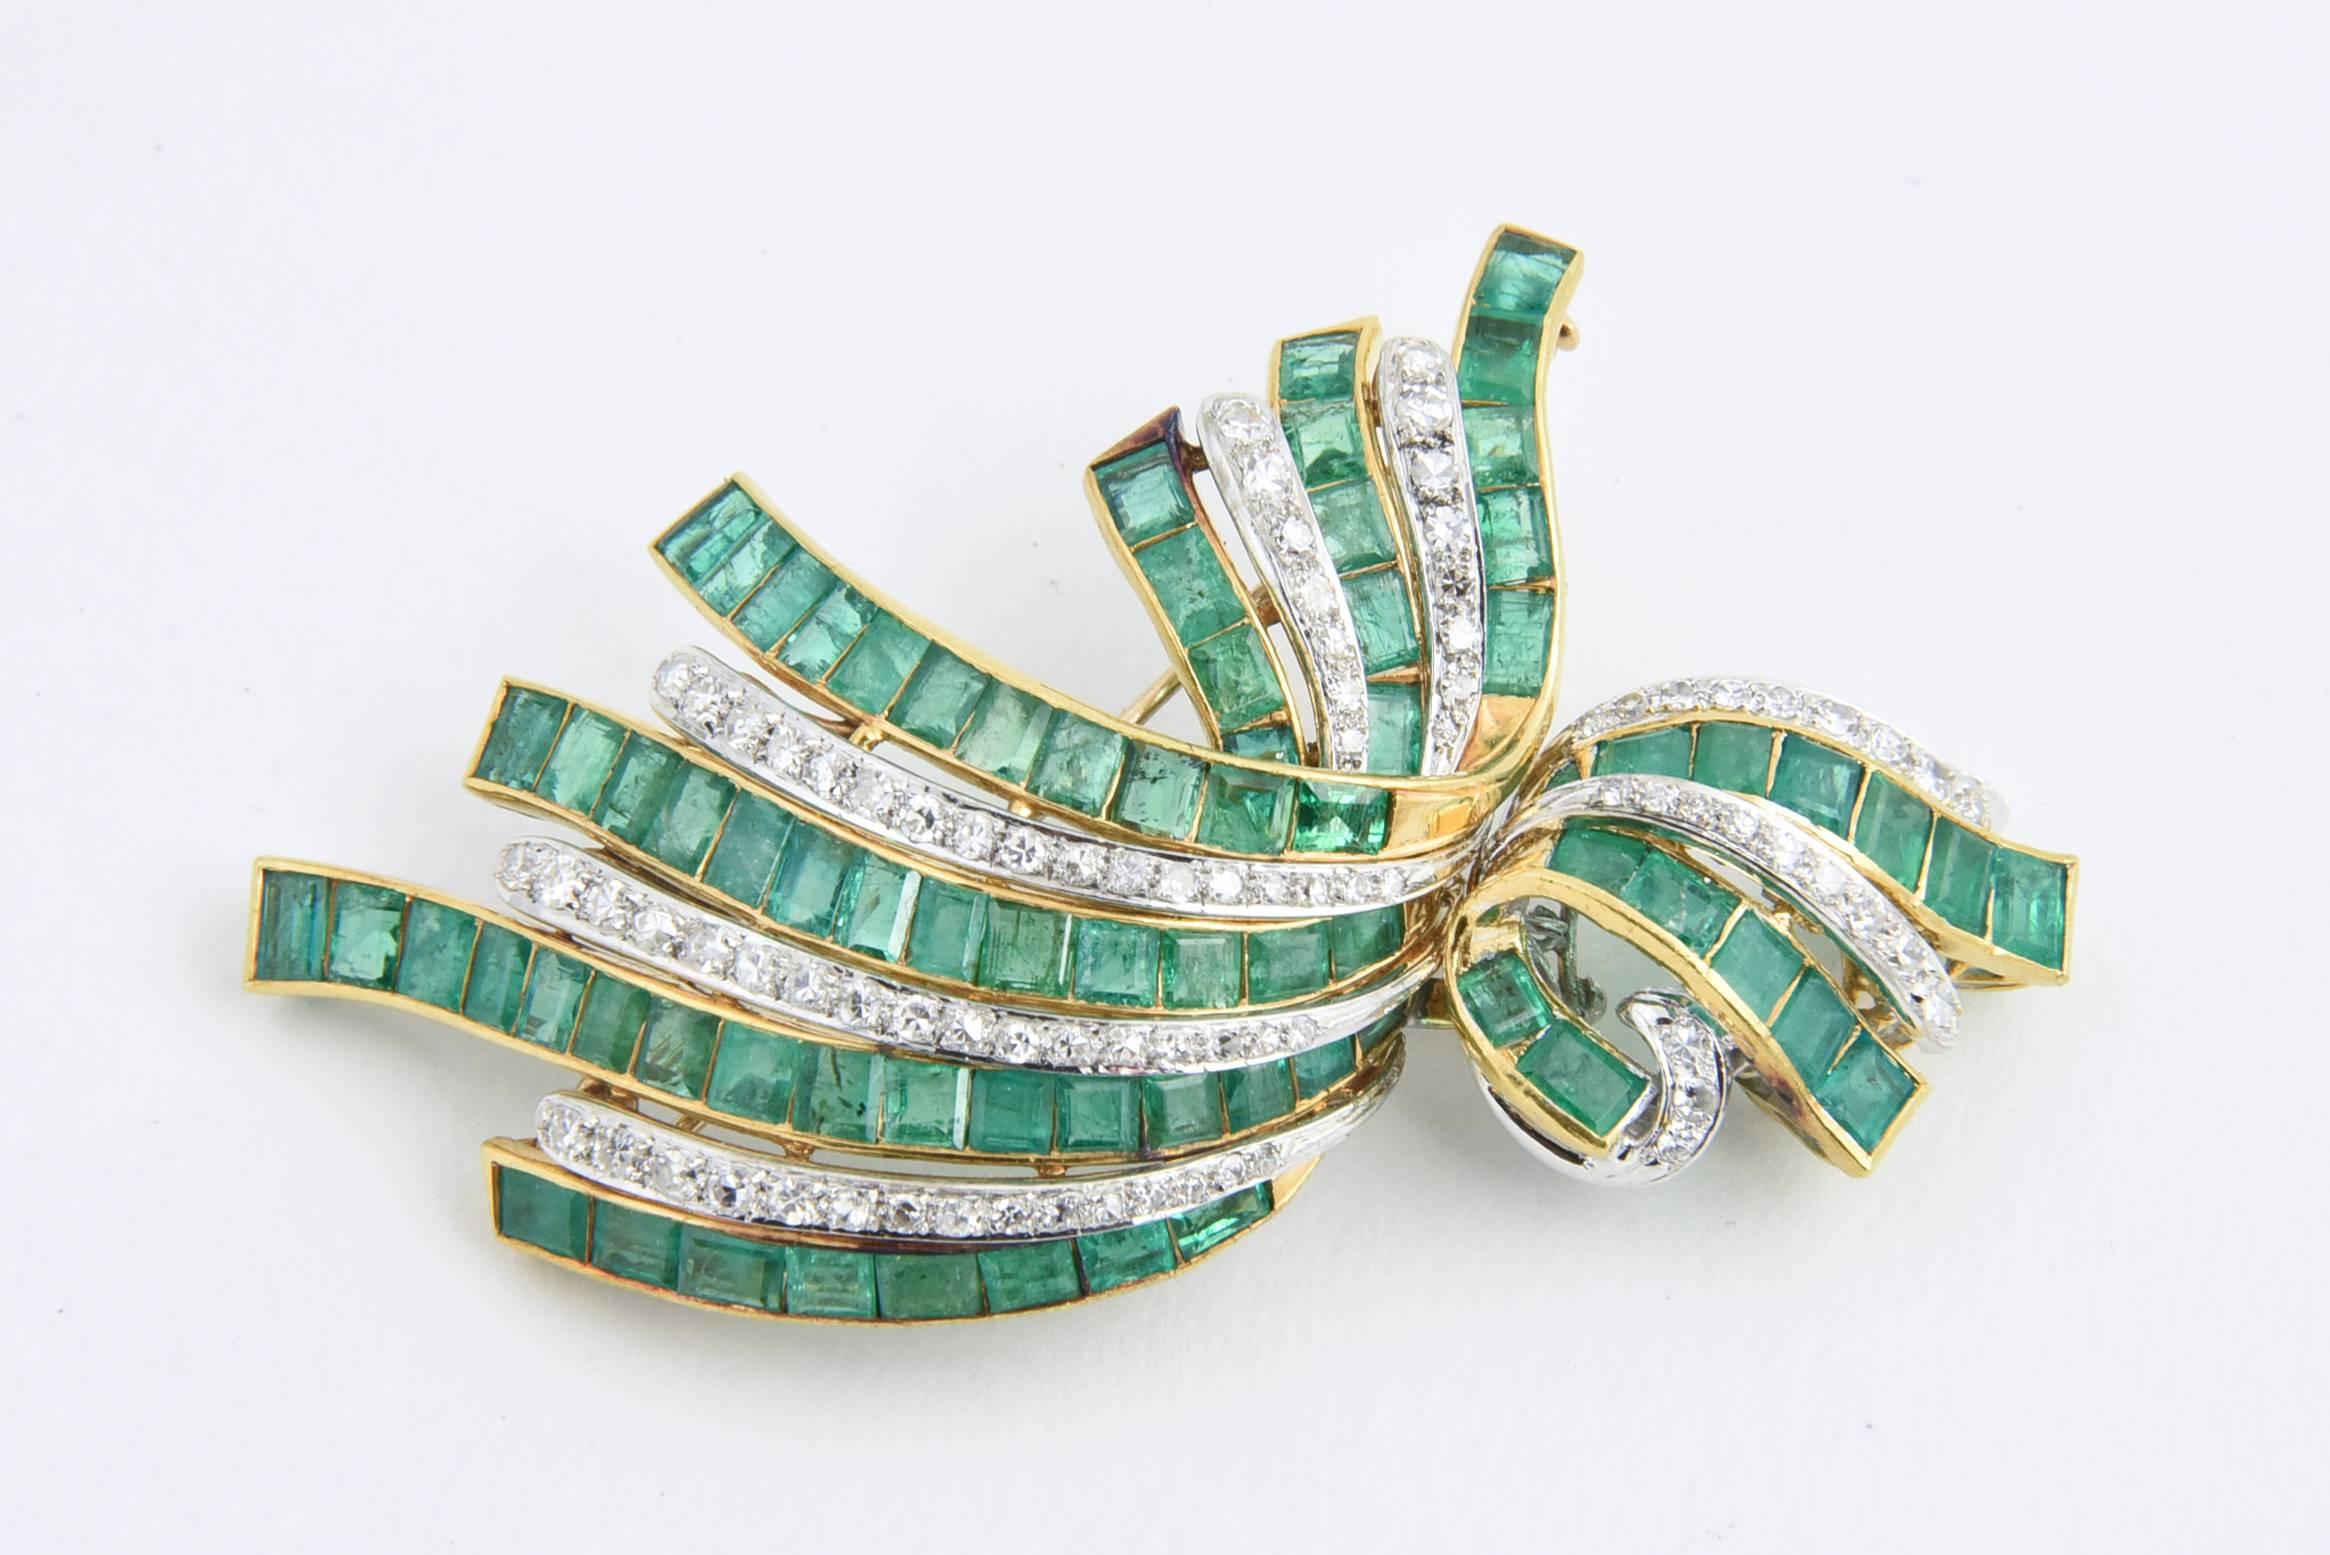 Impressive diamond and emerald brooch and earring mounted in 22k gold.

Earrings measure 1.14 x .62- they have posts
Brooch measure 2.75 x 1.5 